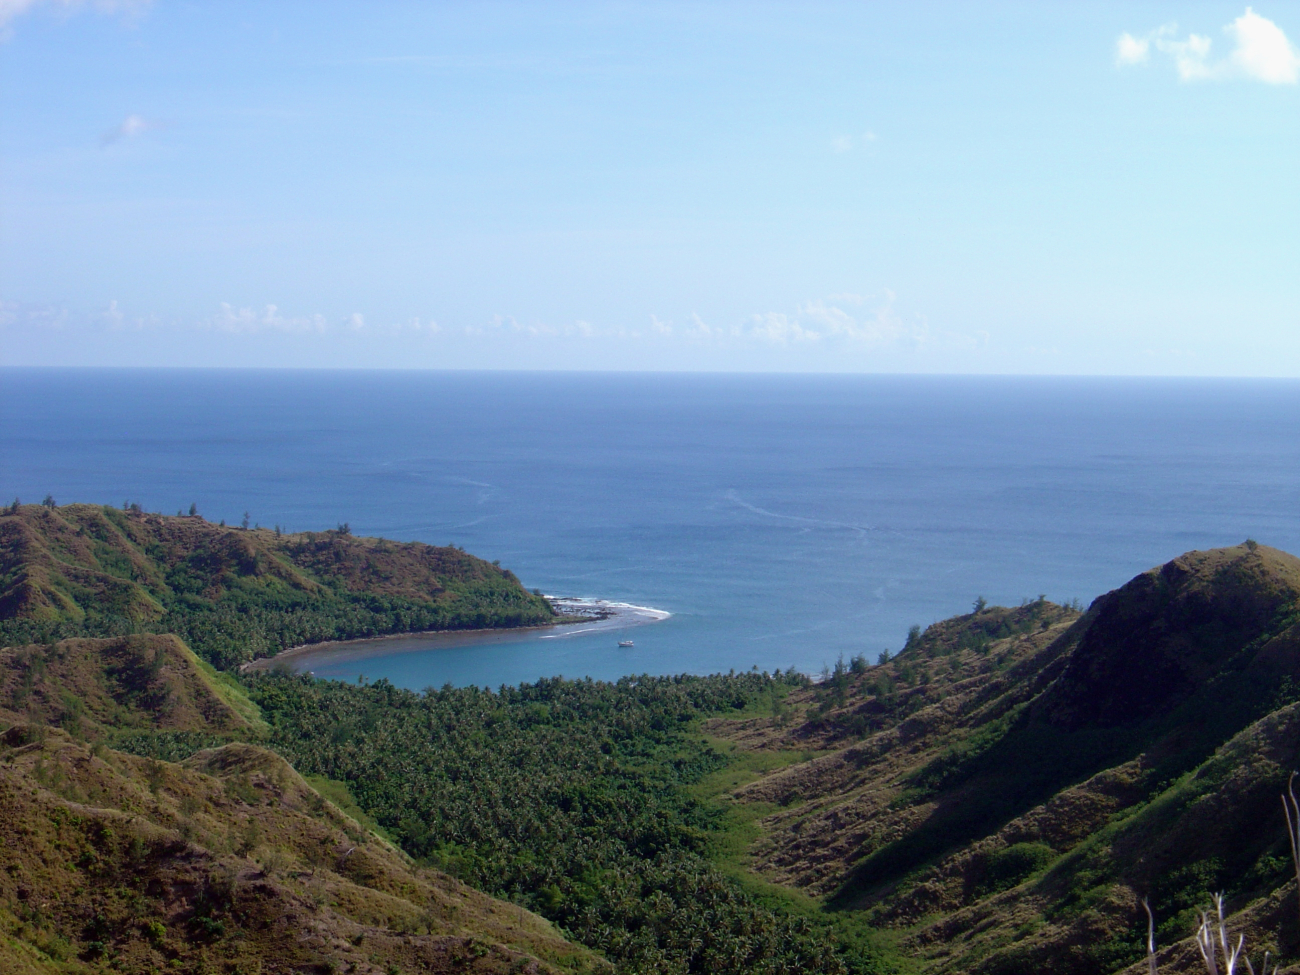 Cetti Bay, on the southern coast of Guam